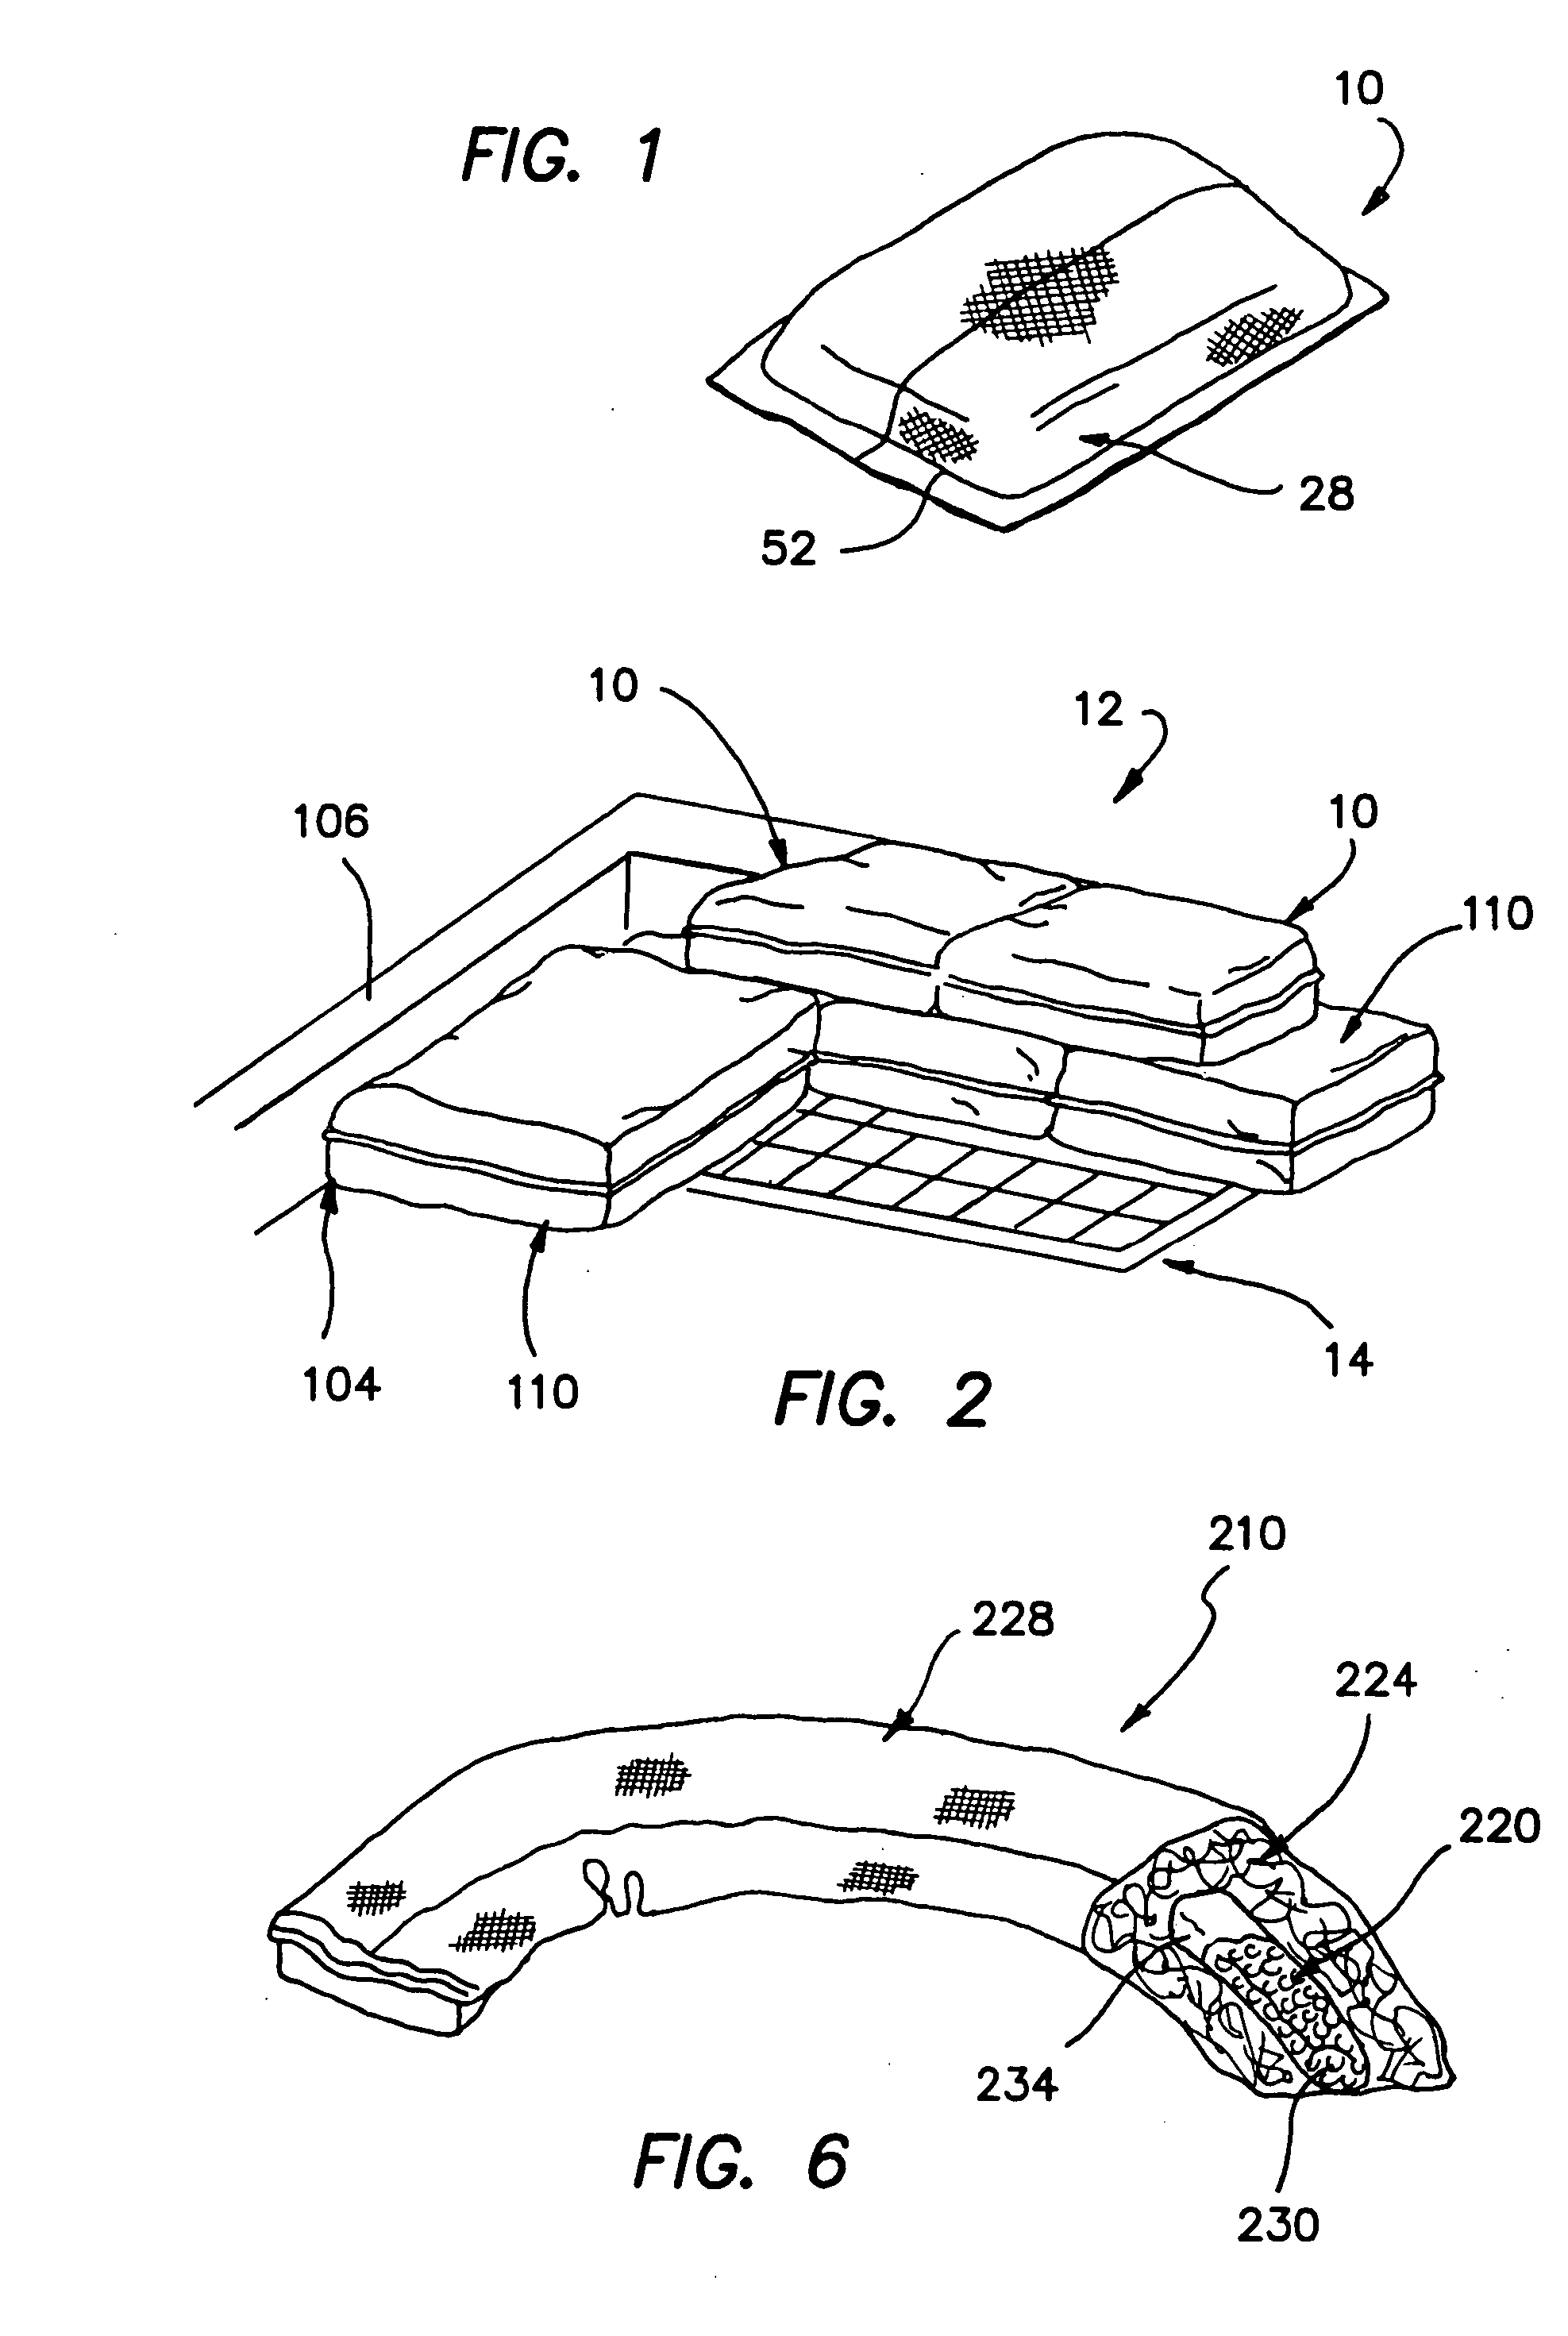 Sediment control device and system